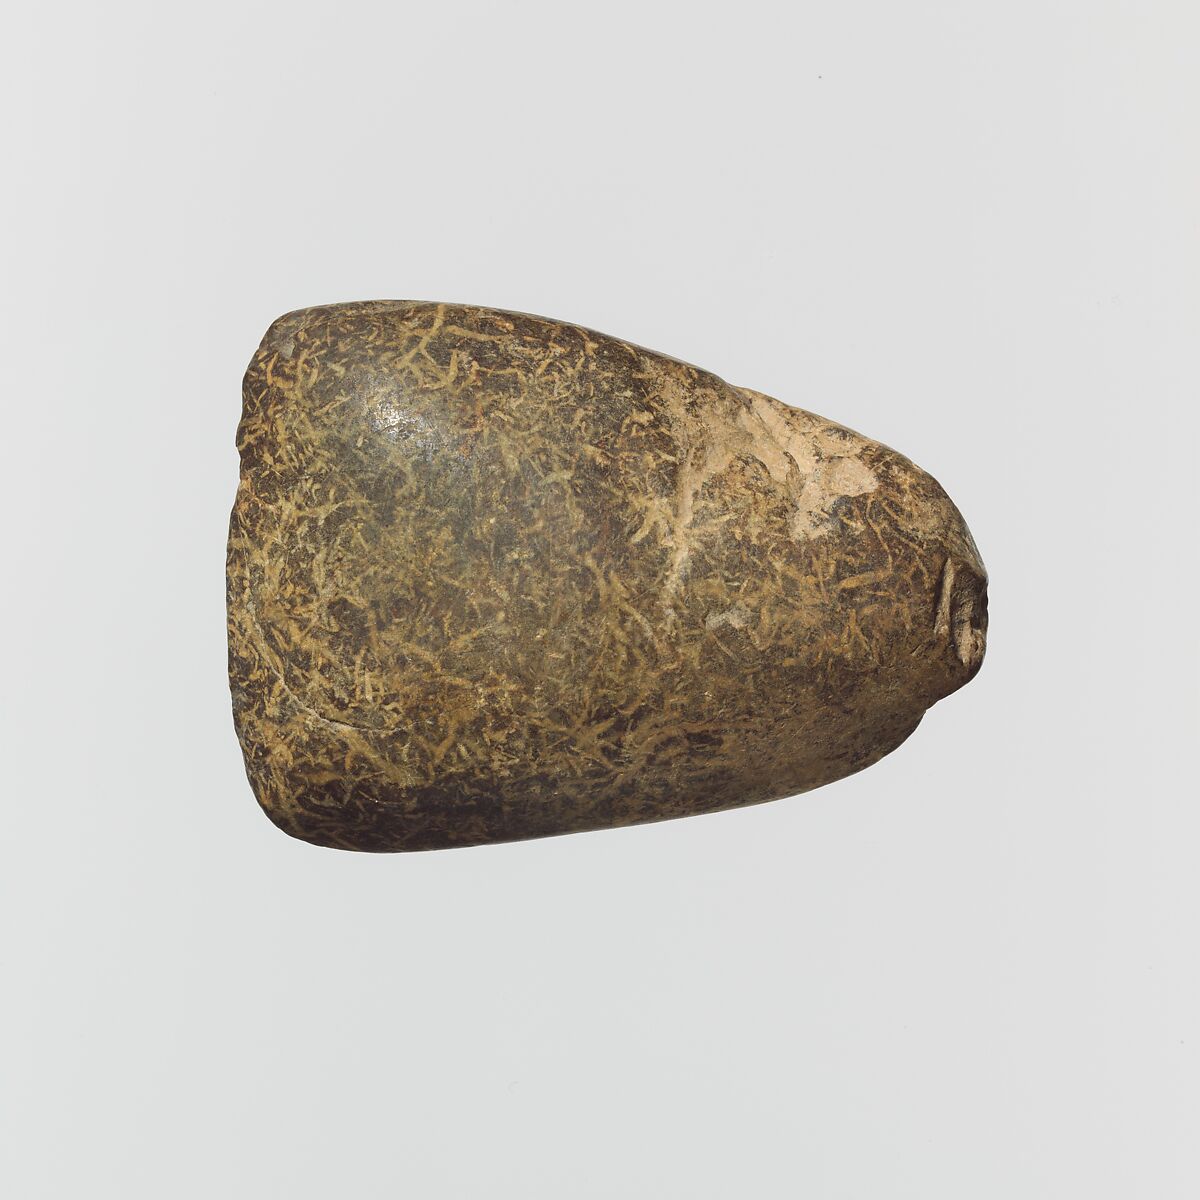 Small stone axe, Stone, Greek Neolithic 